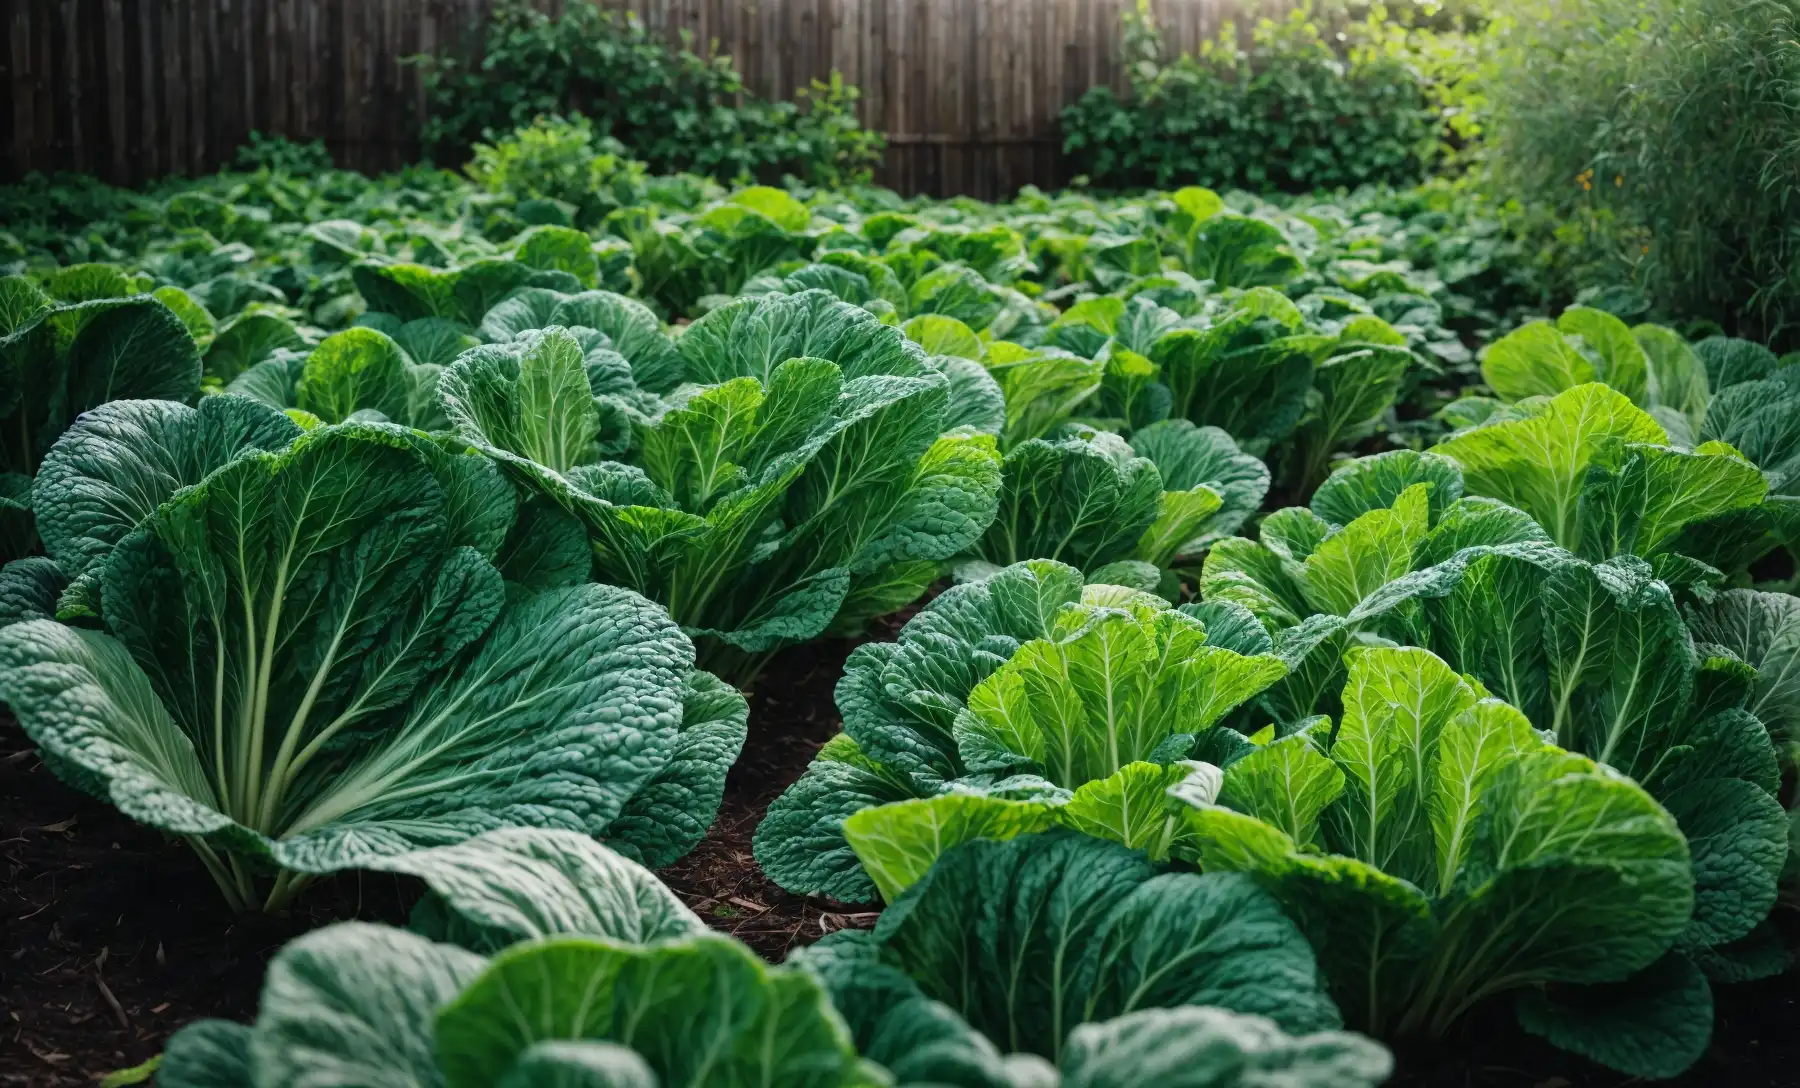 Where to Buy Cabbage Plants: Find Your Greens